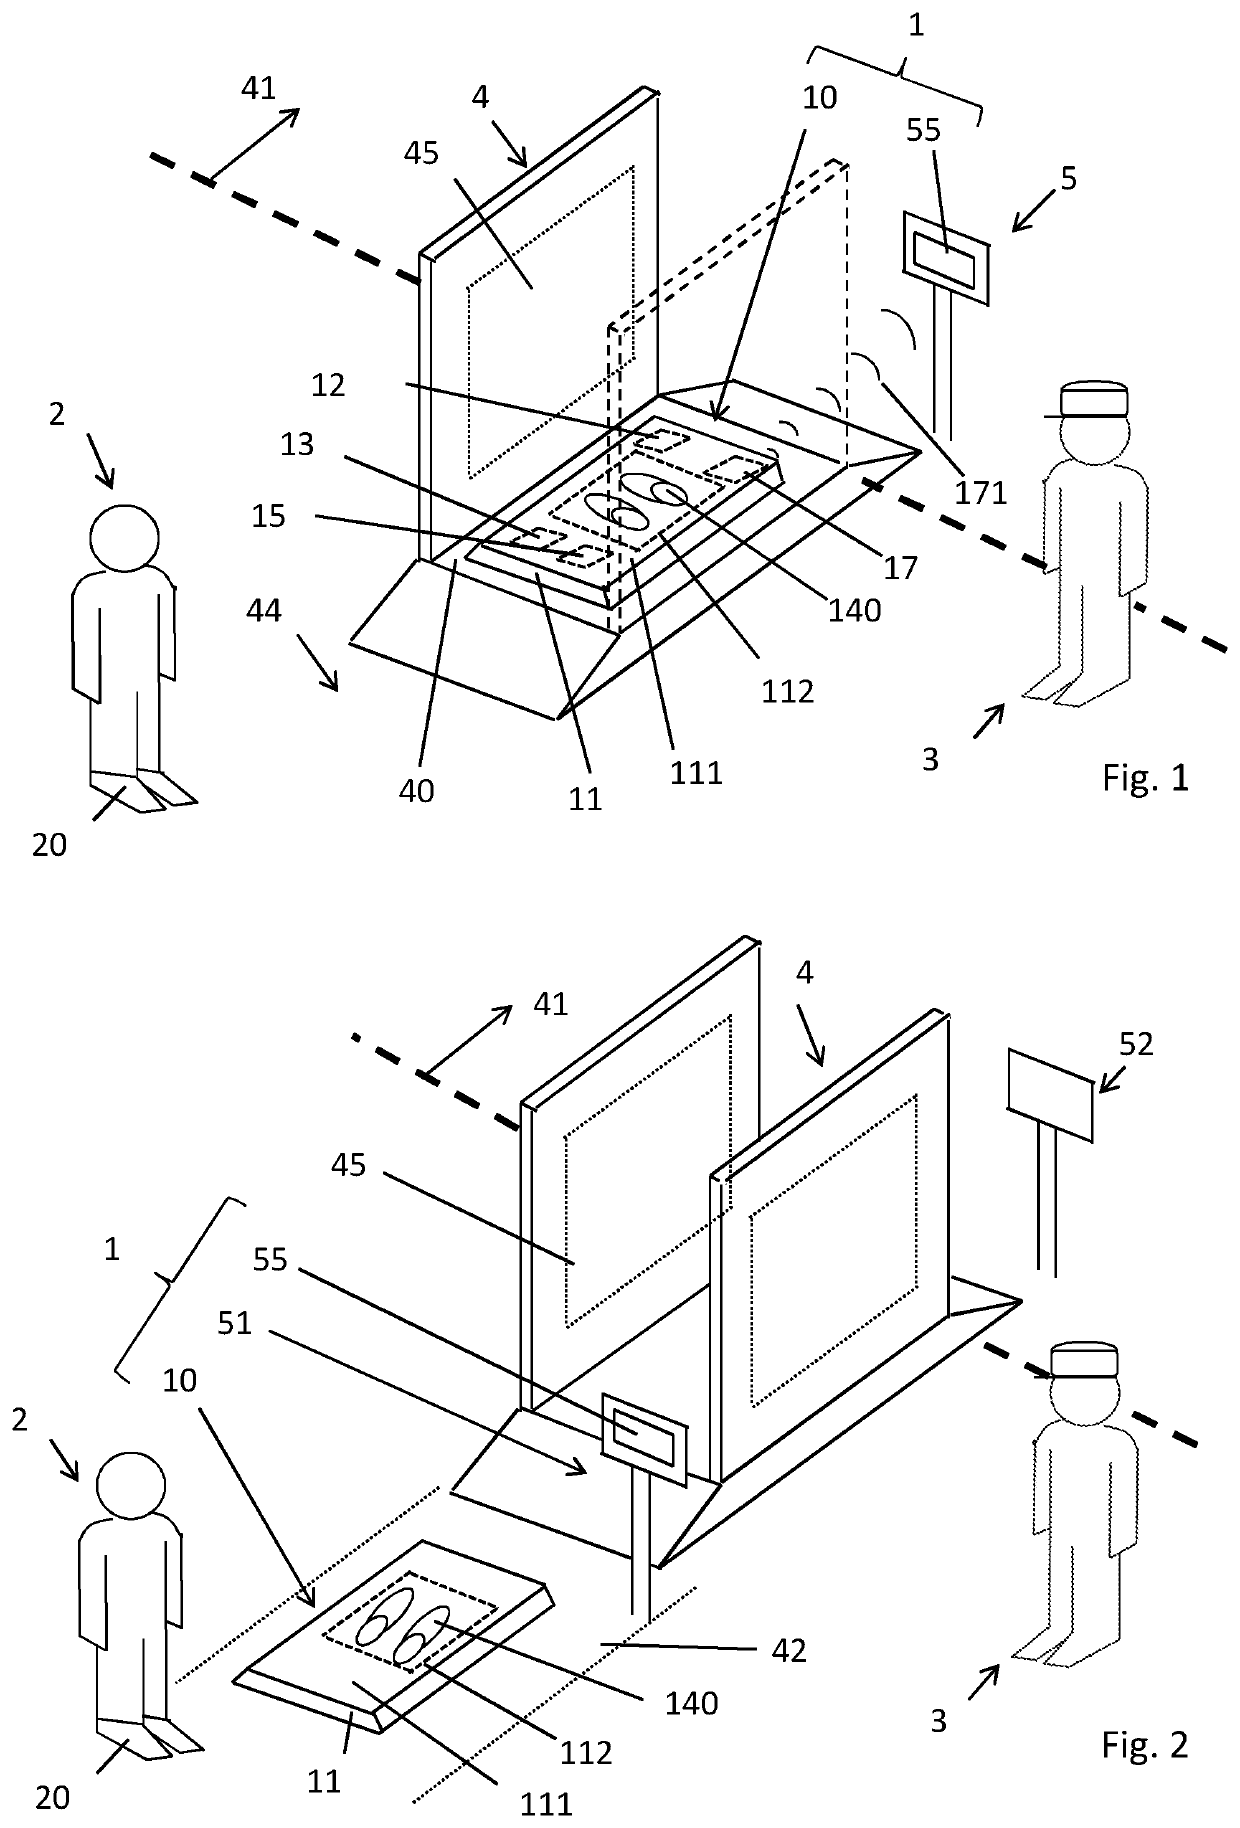 Shoe scanning system for full-body scanner and method for retrofitting a full-body scanner